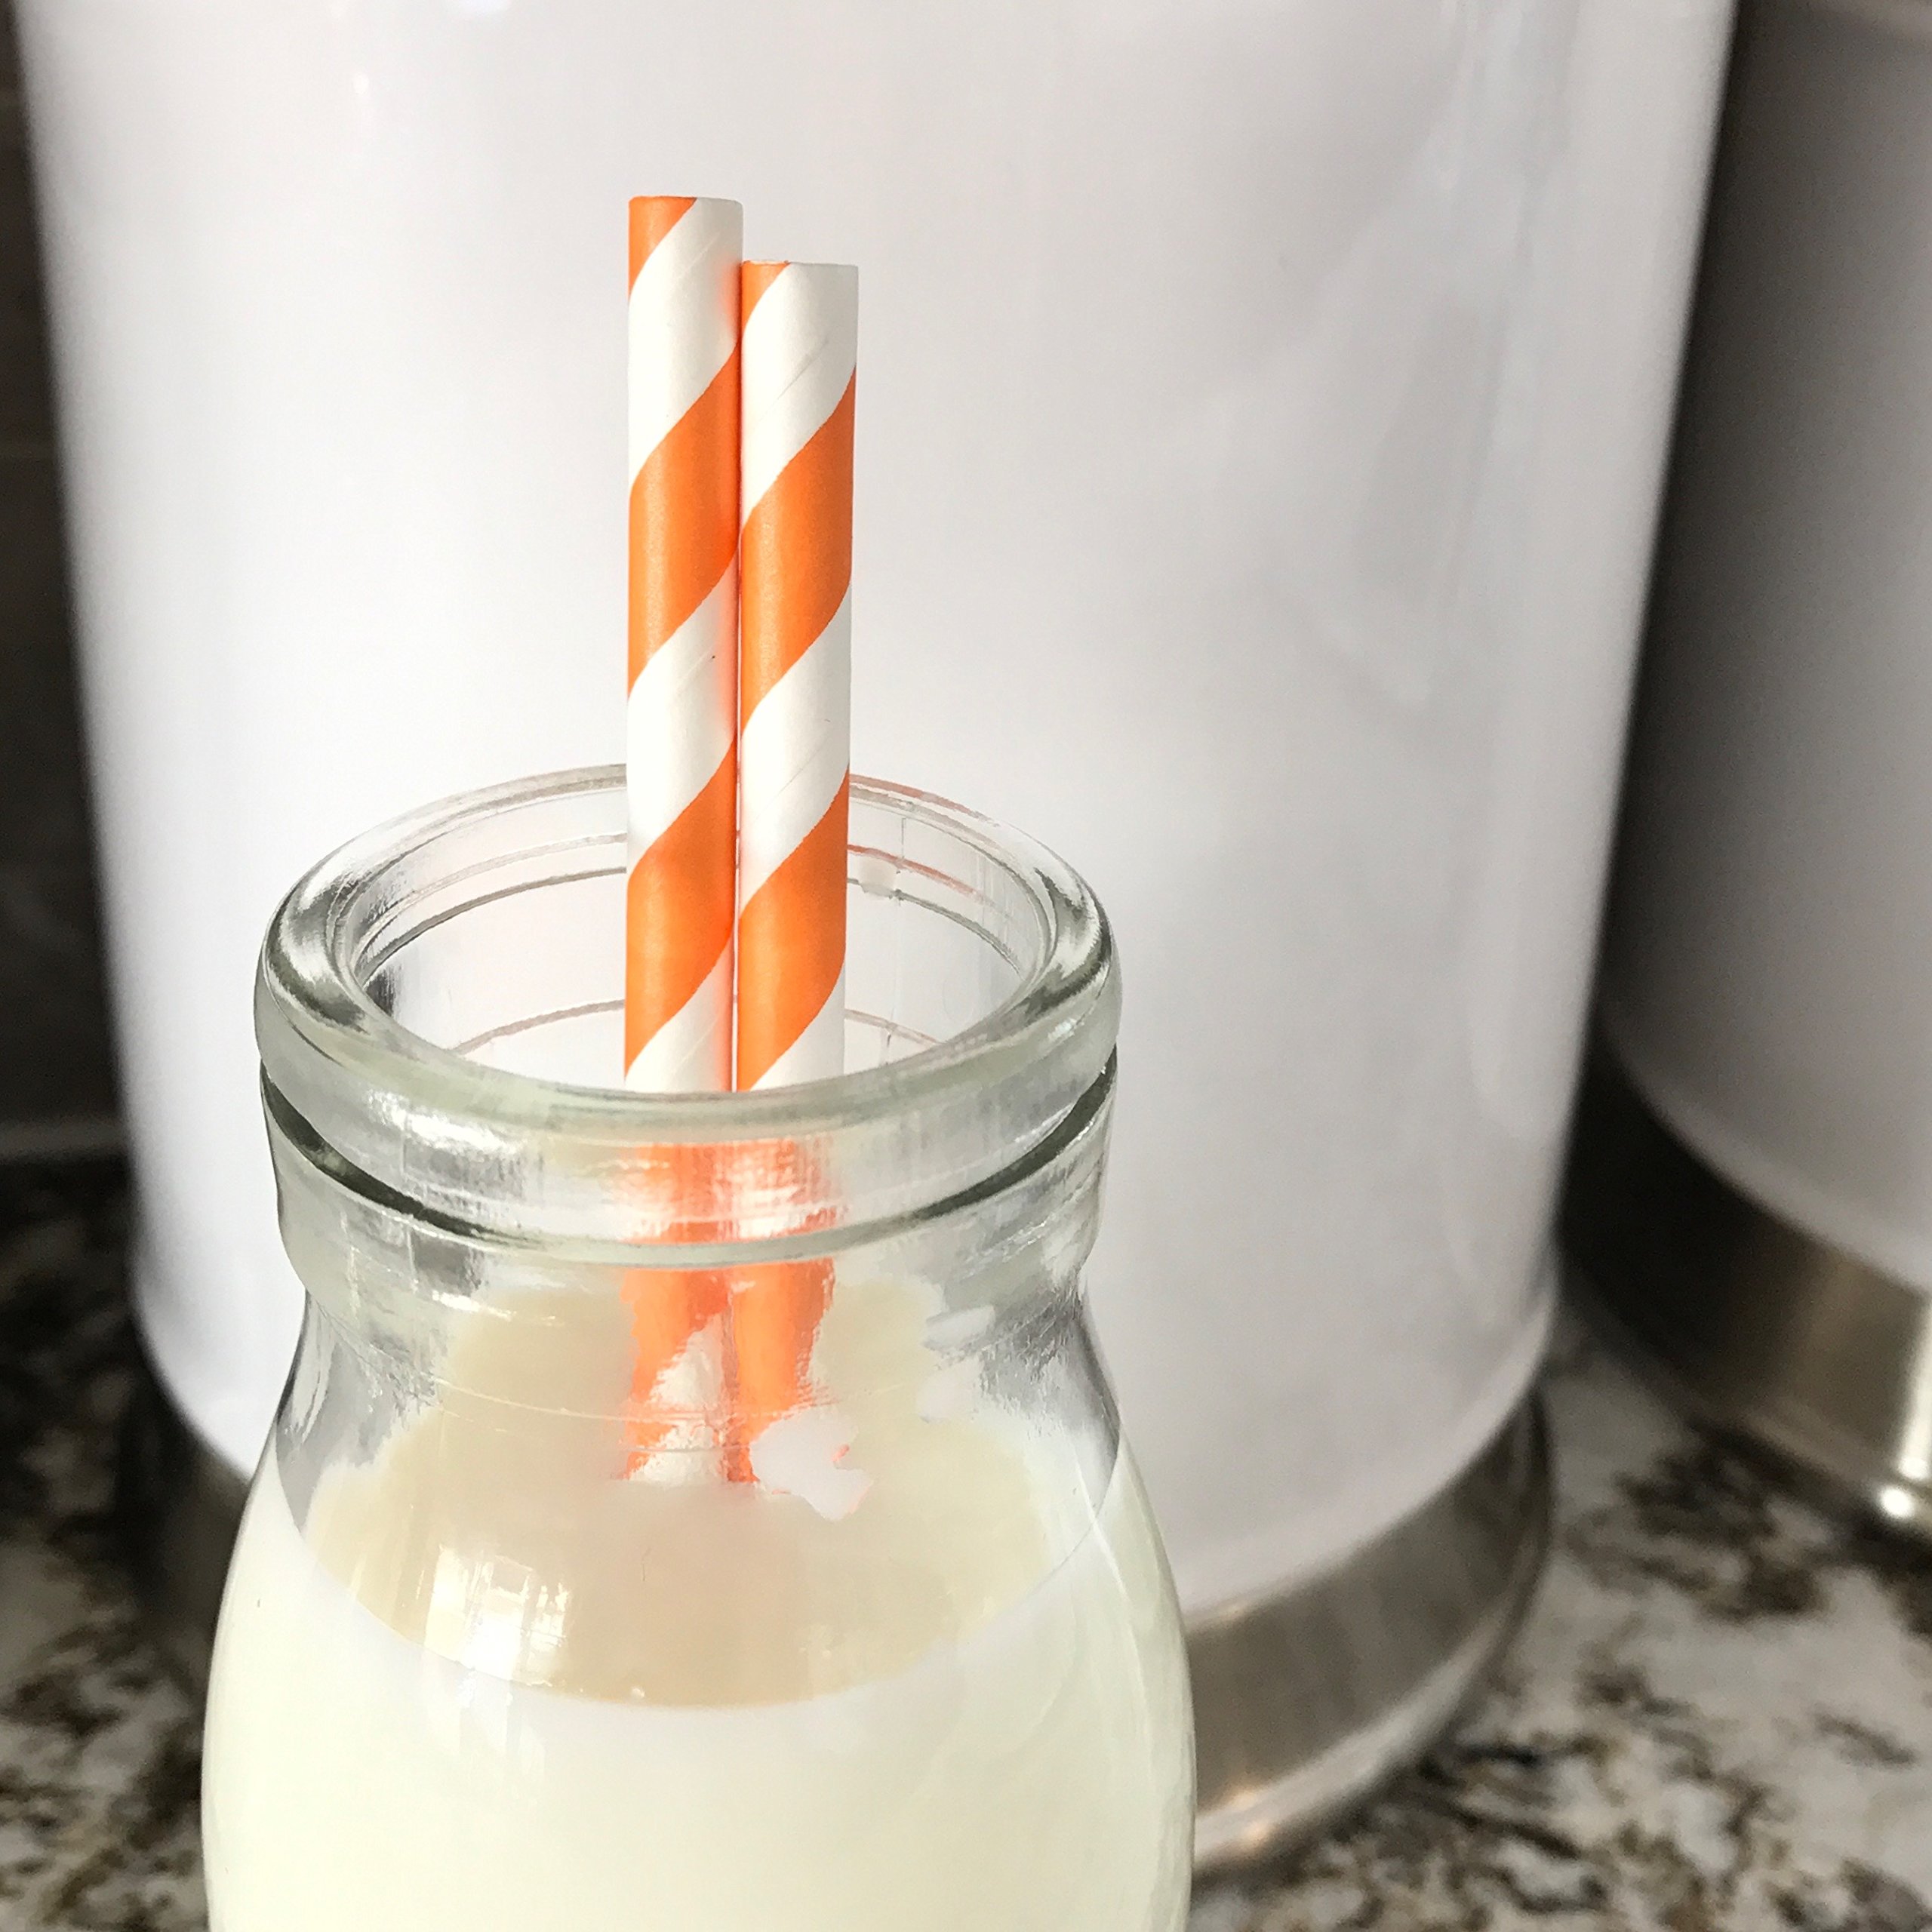 Striped Paper Straws - Party Supply - Orange and White - 7.75 Inches - 50 Pack - Outside the Box Papers Brand